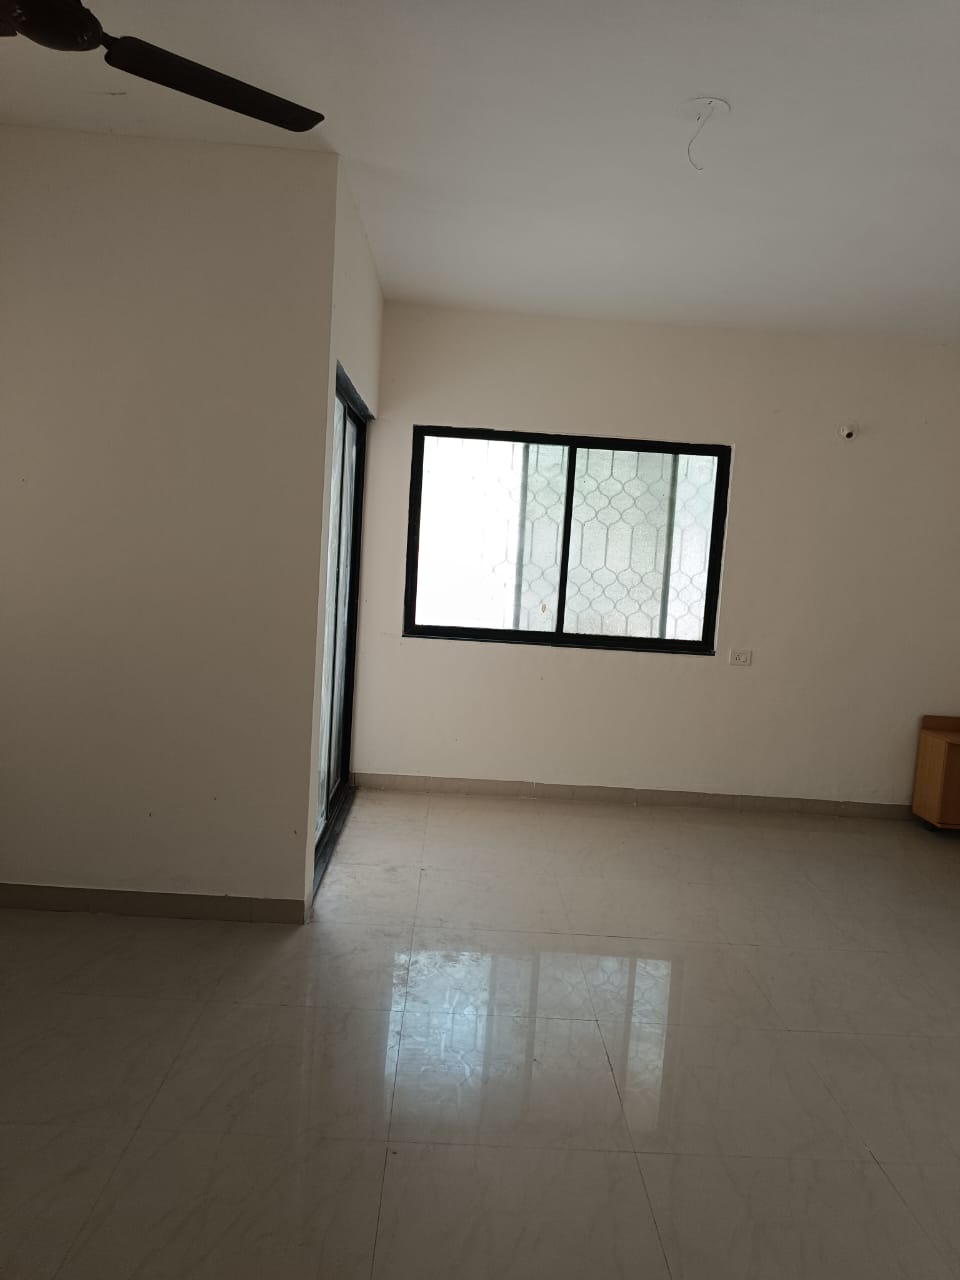 2 BHK Residential Apartment for Rent Only in Balewadi